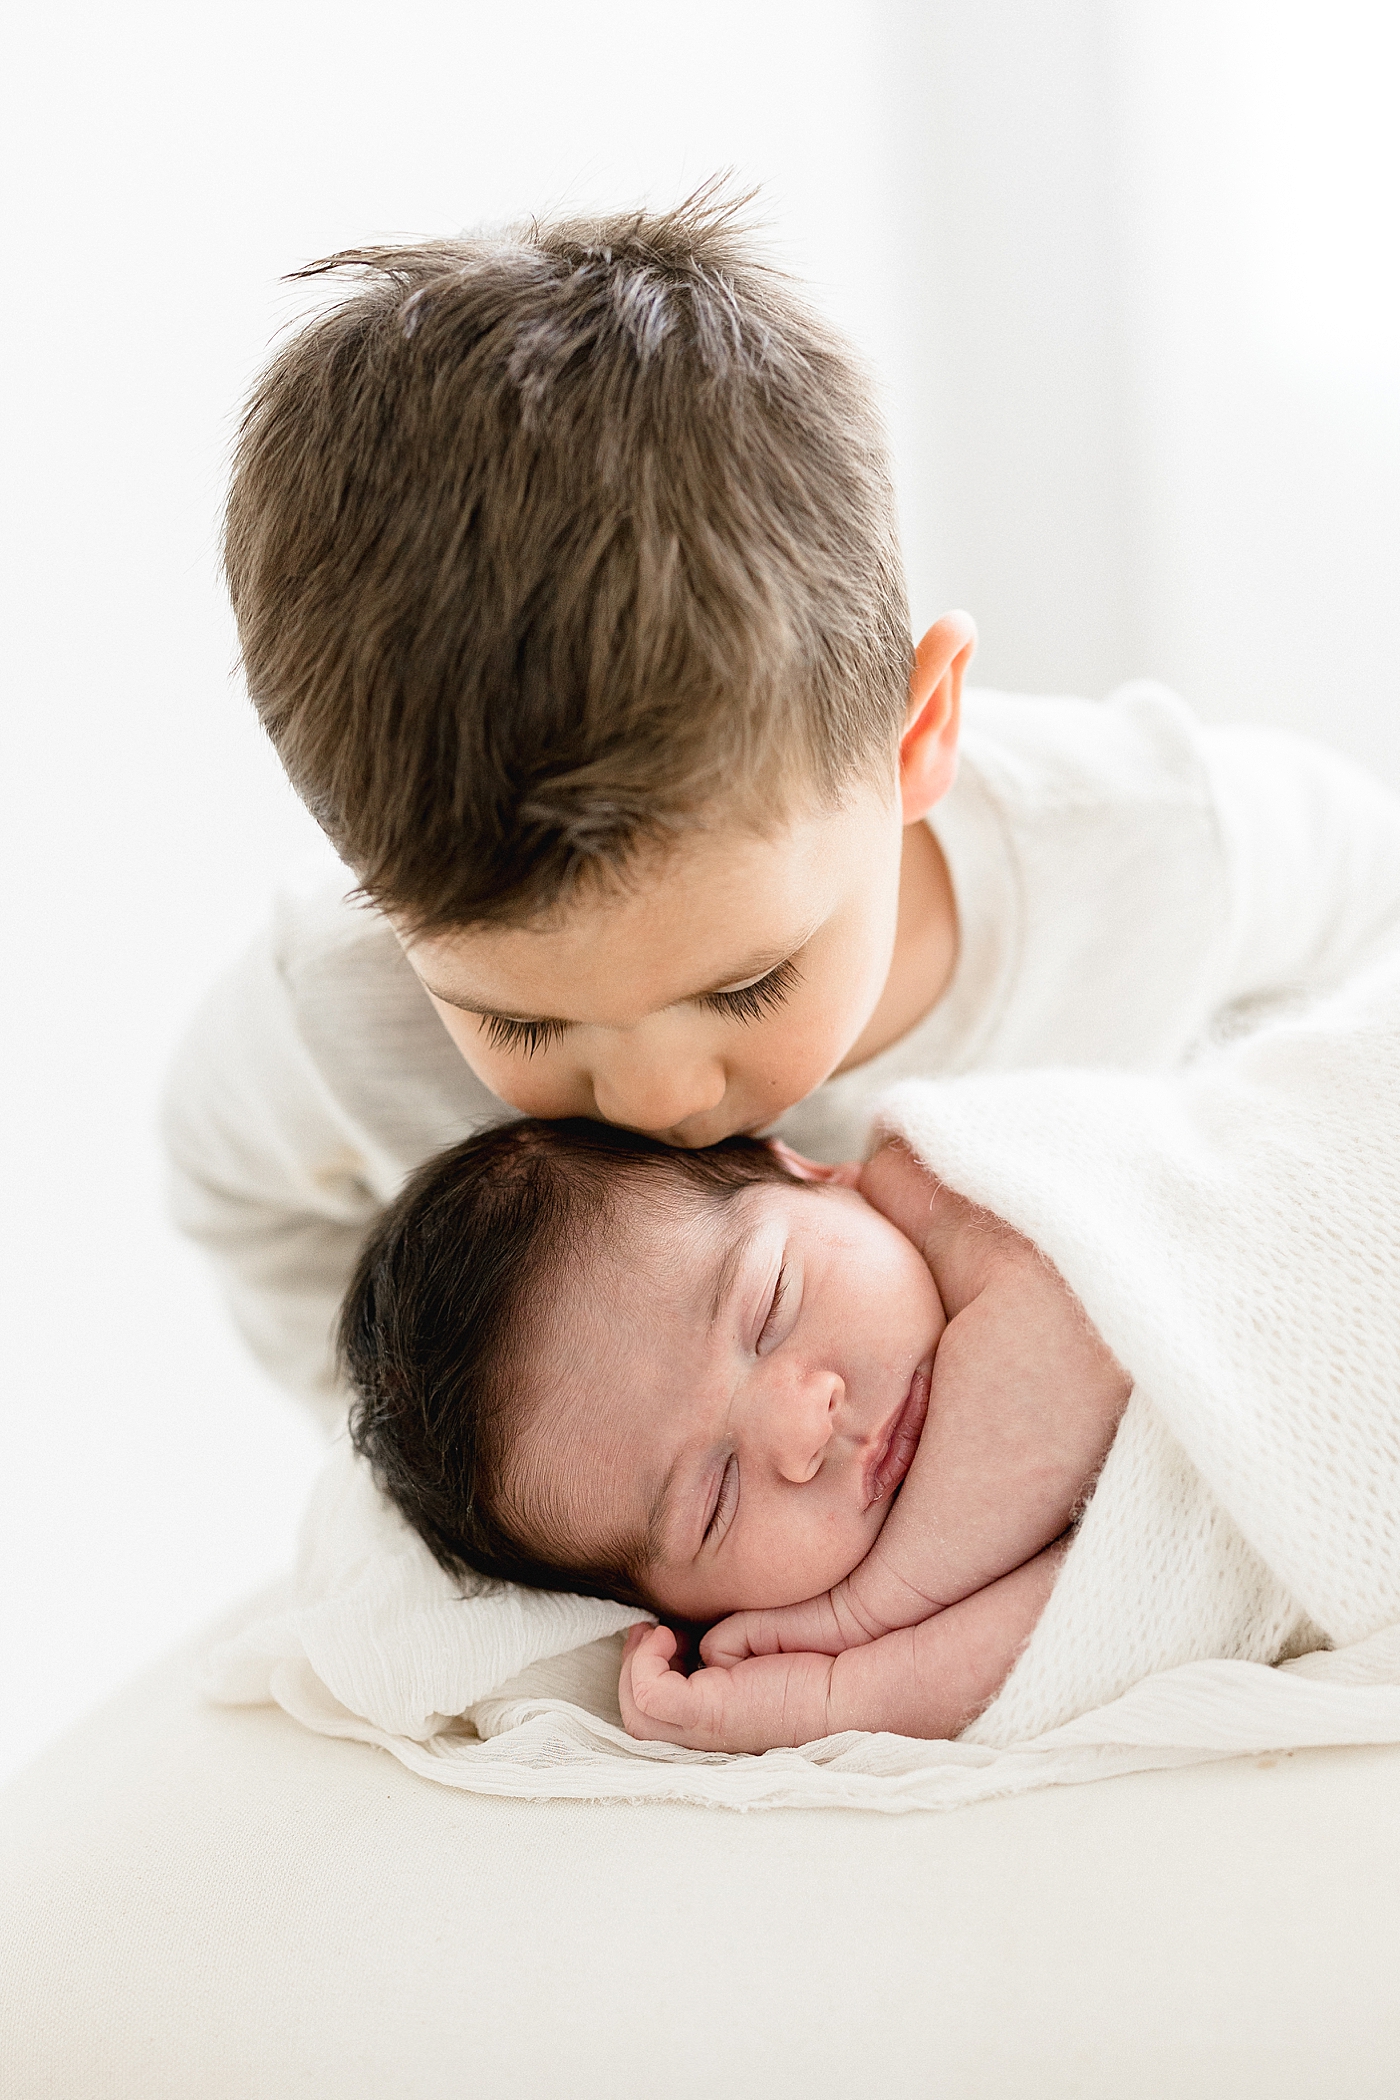 Big brother giving his baby brother a kiss. Photo by Brittany Elise Photography.